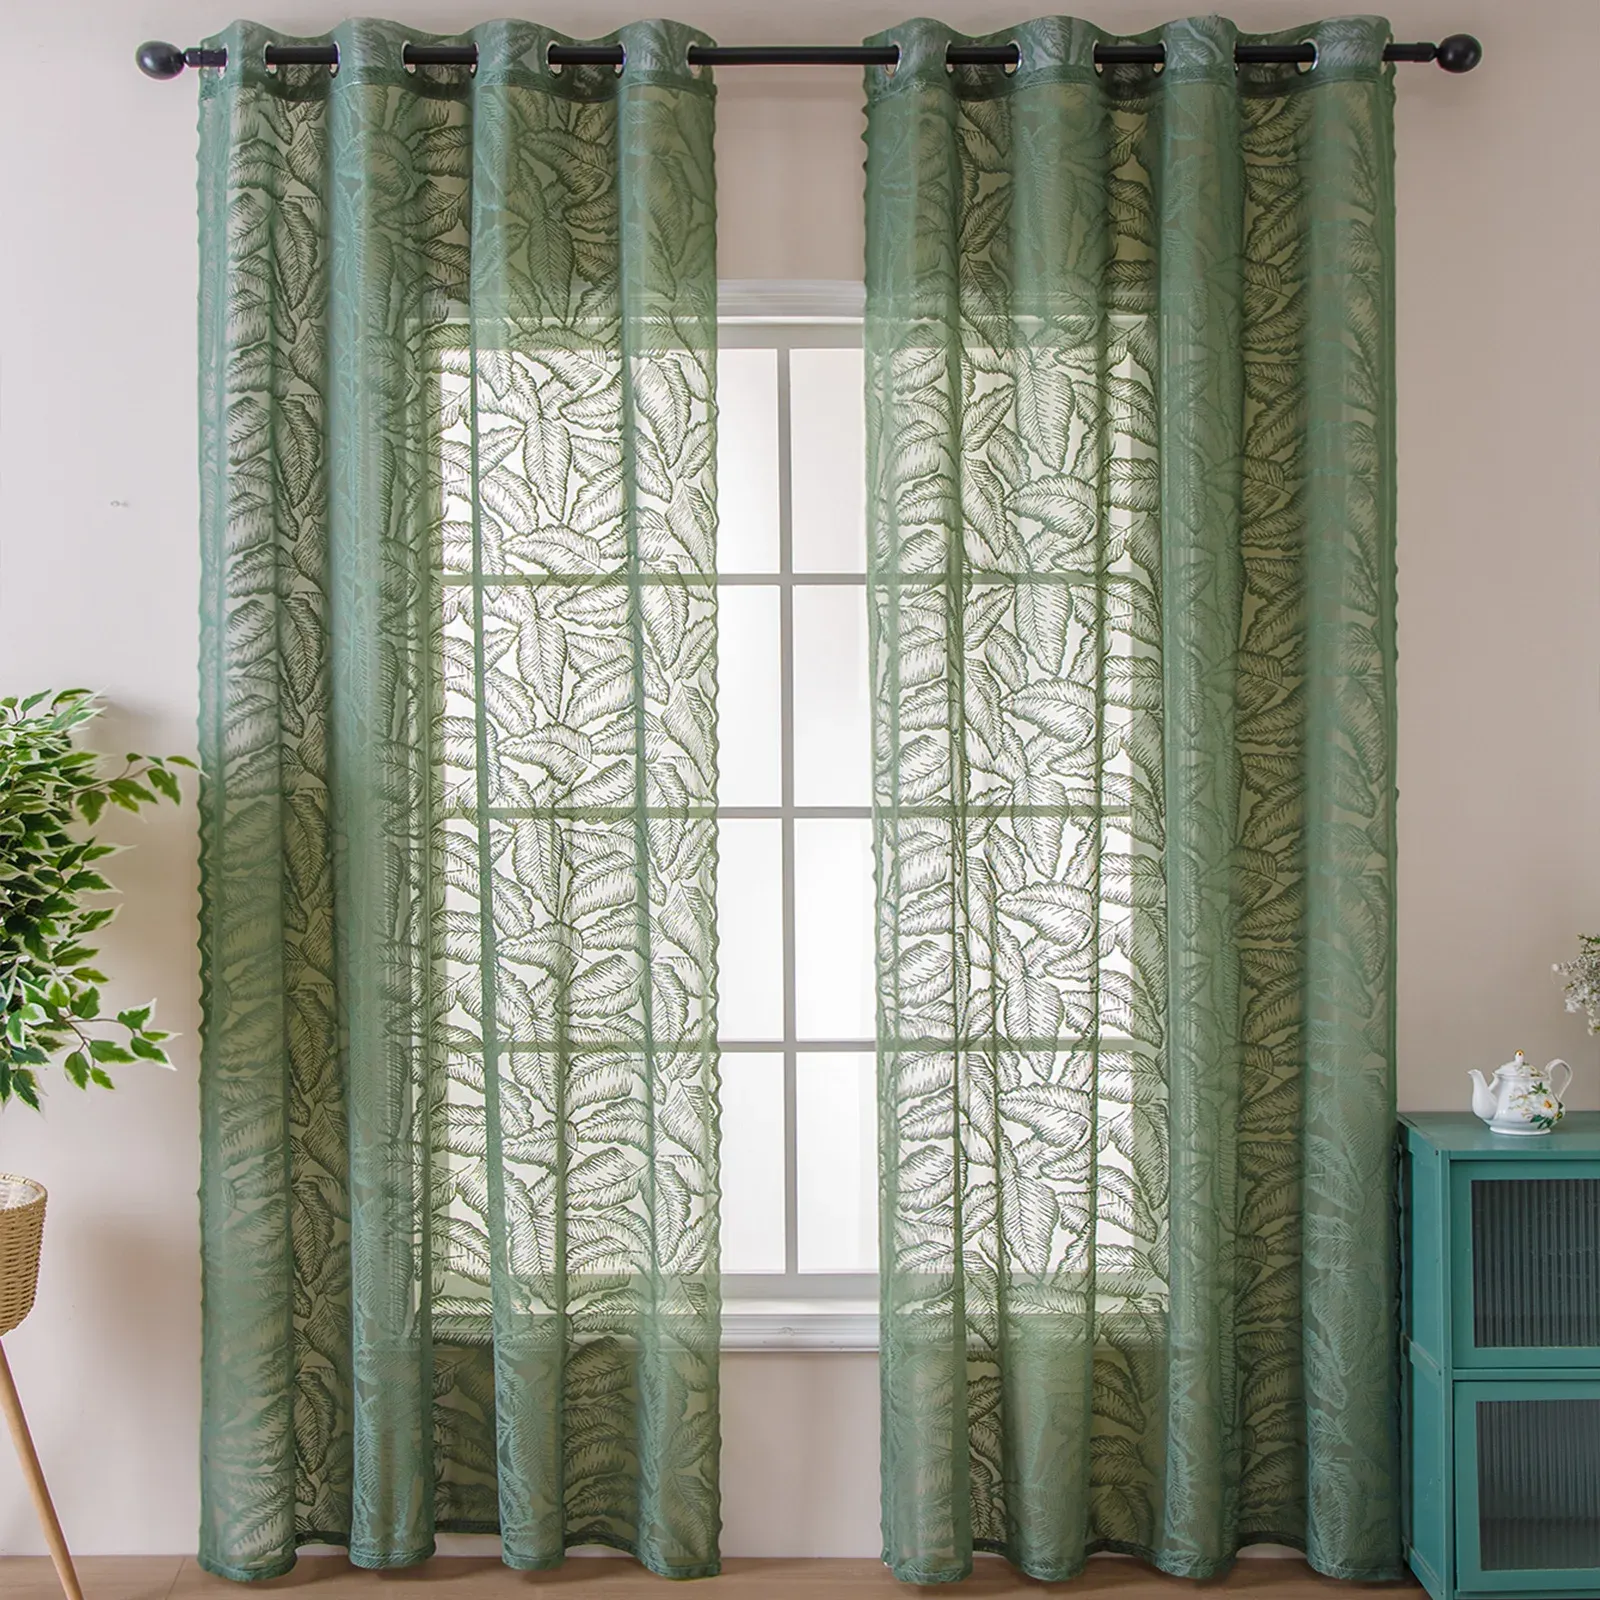 Curtains Green Warp Knitted Leaf Curtain for Kitchen Door Lace Sheer Voile Drape Window Treatment Balcony Grommet Ring #E